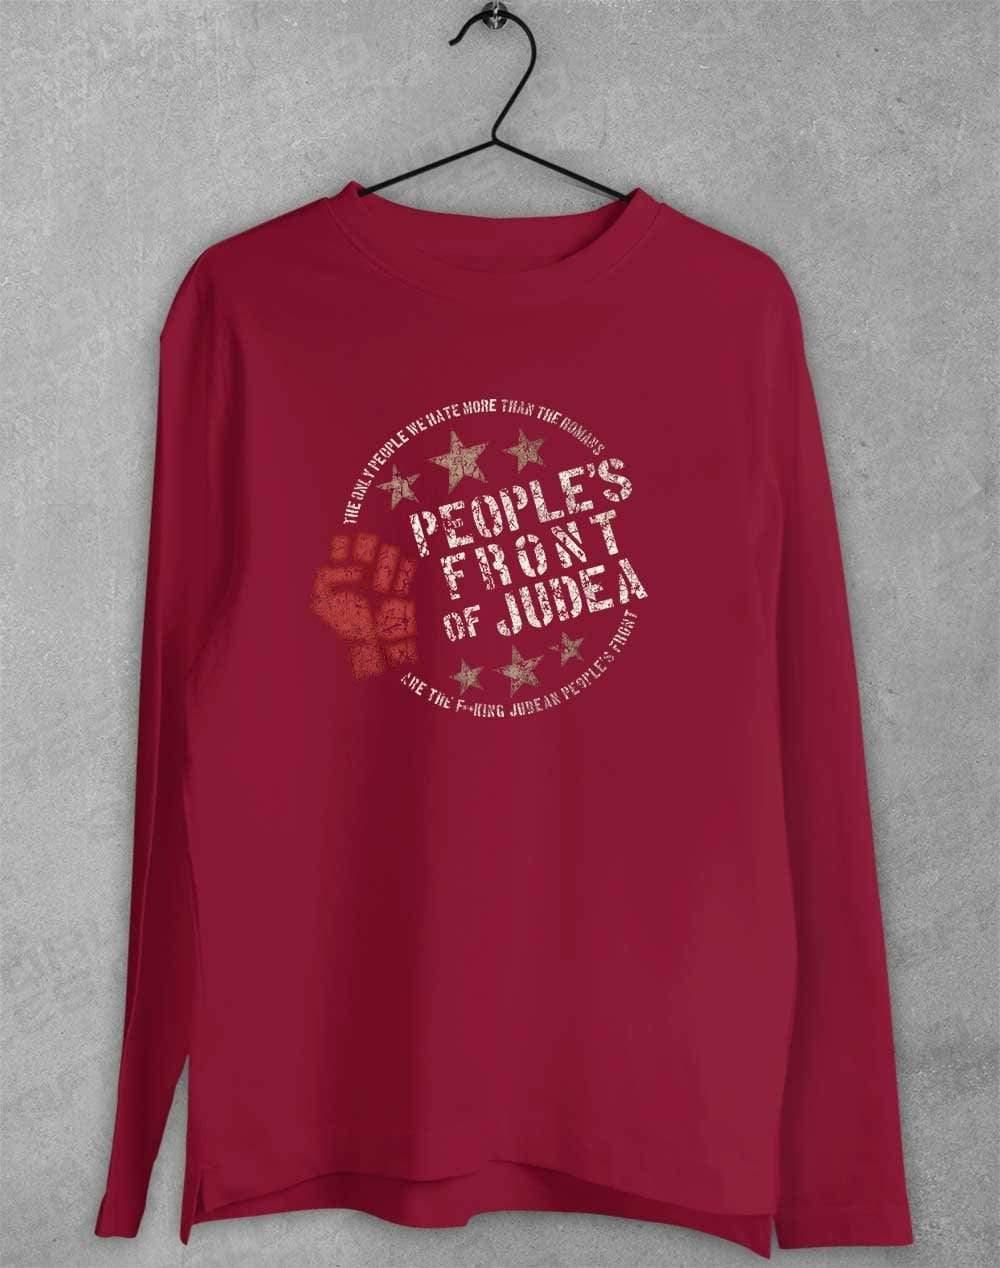 People's Front of Judea Long Sleeve T-Shirt S / Cardinal  - Off World Tees